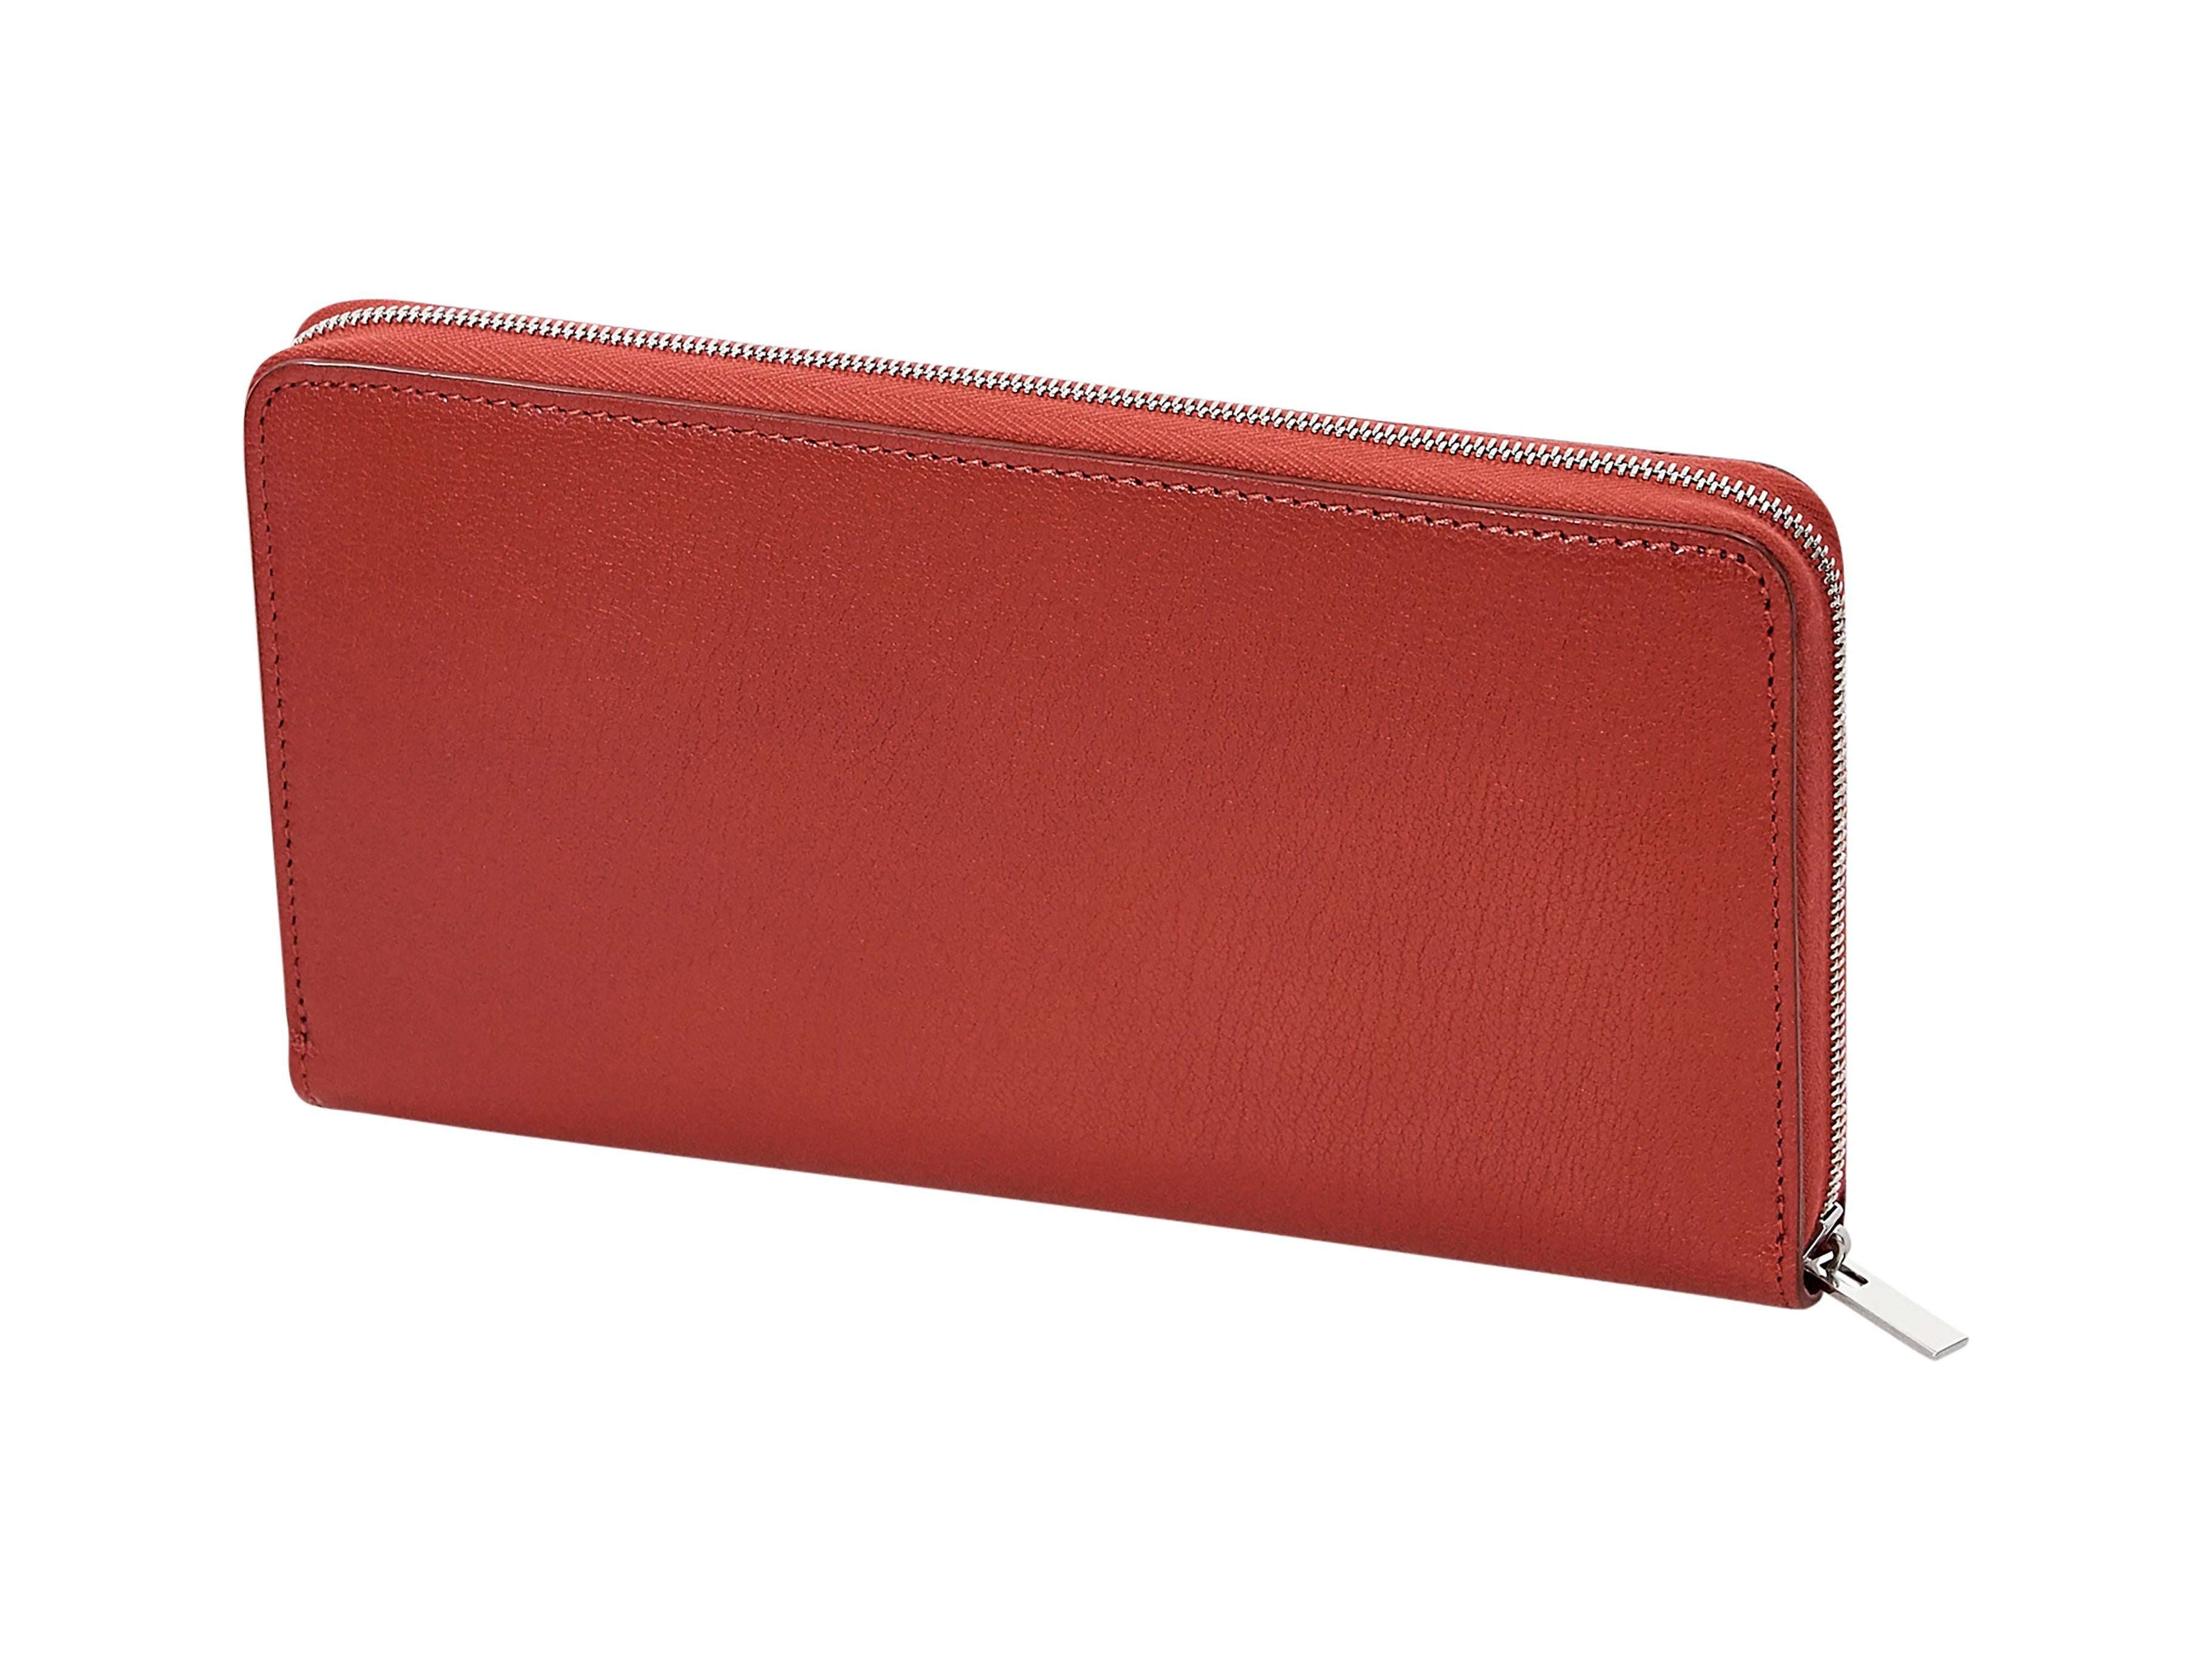 Product details:  Red leather large wallet by Céline.  Zip-around closure.  Leather lined interior with multiple credit card slots and center zip coin pouch.  Silvertone hardware.  7.5